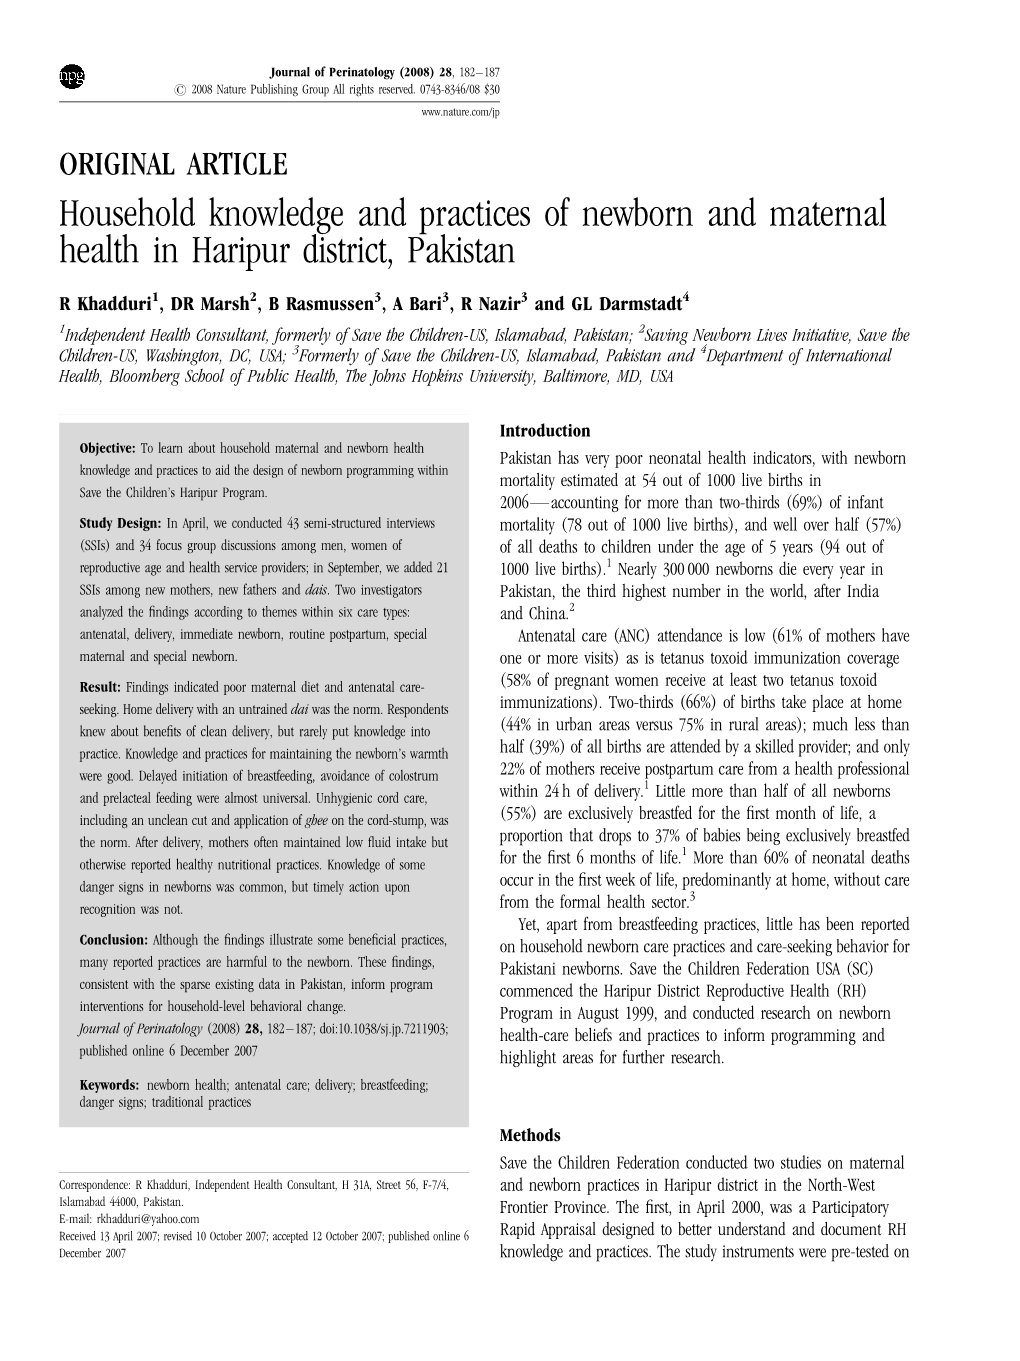 Household Knowledge and Practices of Newborn and Maternal Health in Haripur District, Pakistan